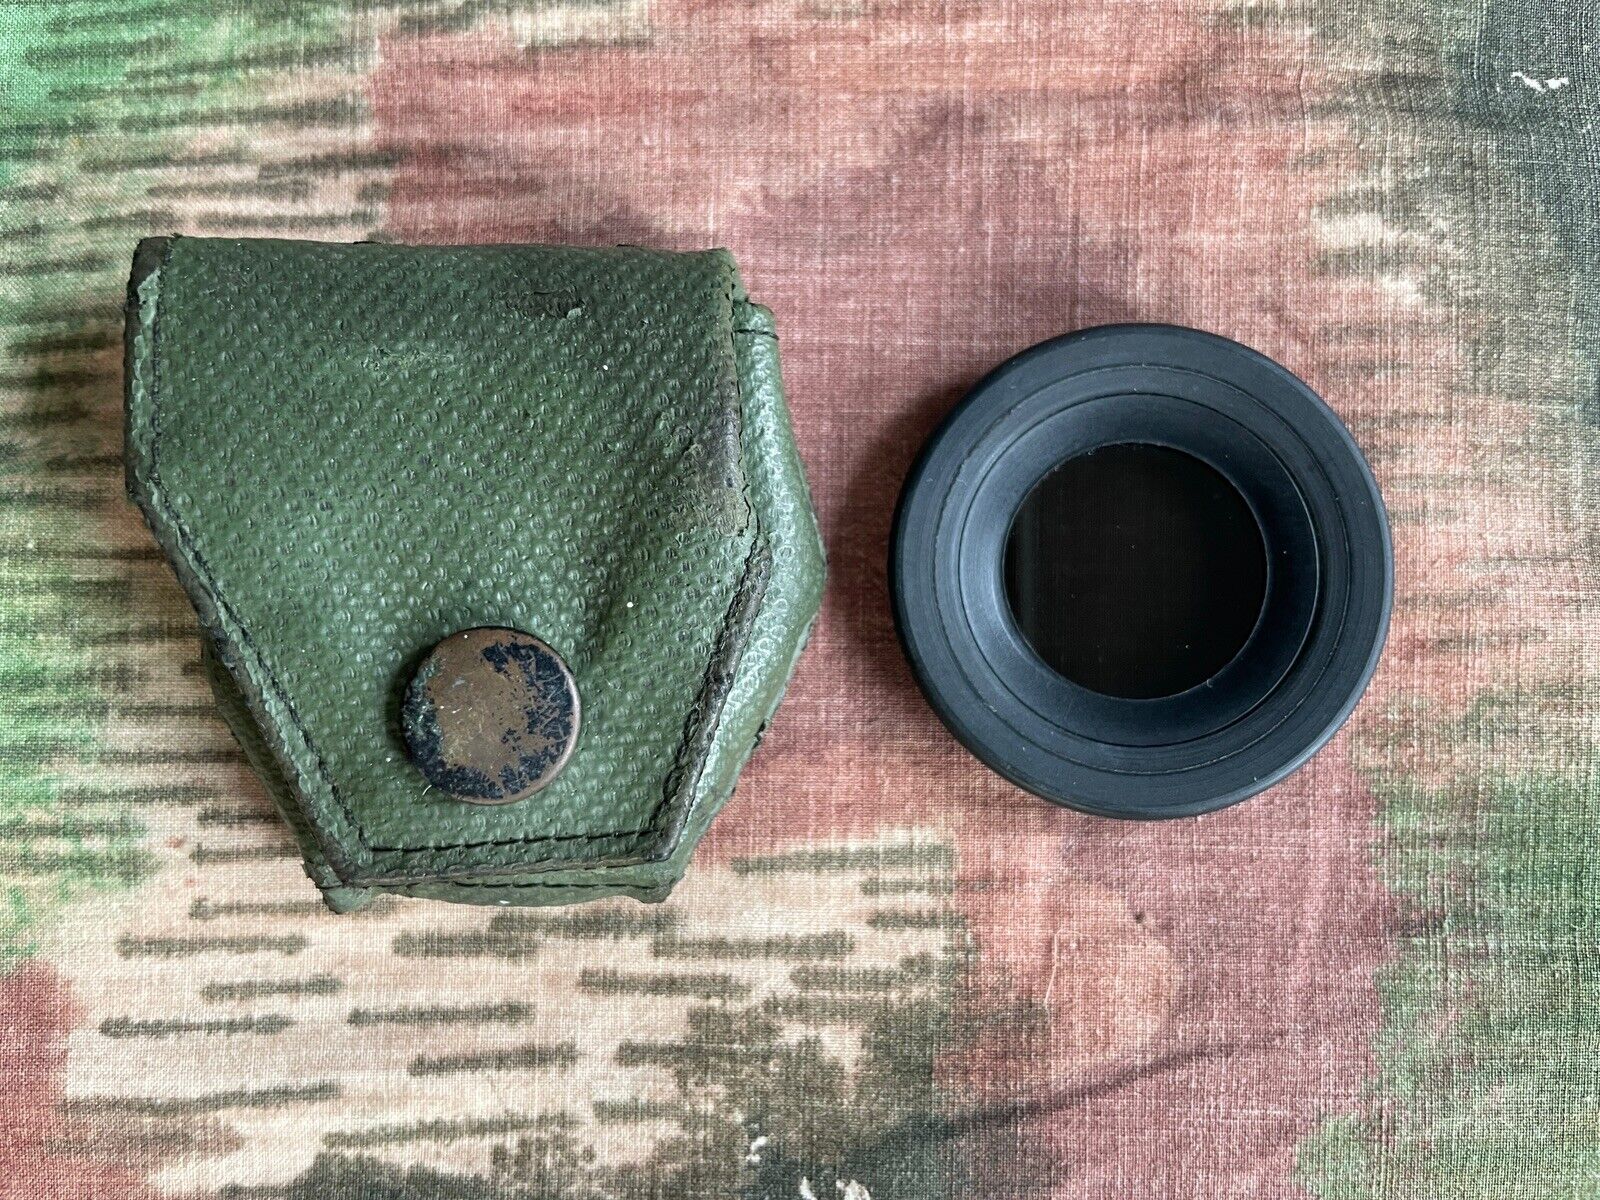 RARE BRITISH ARMY L4A2 NIGHT VISION GOGGLES SUN FILTER & POUCH NVG